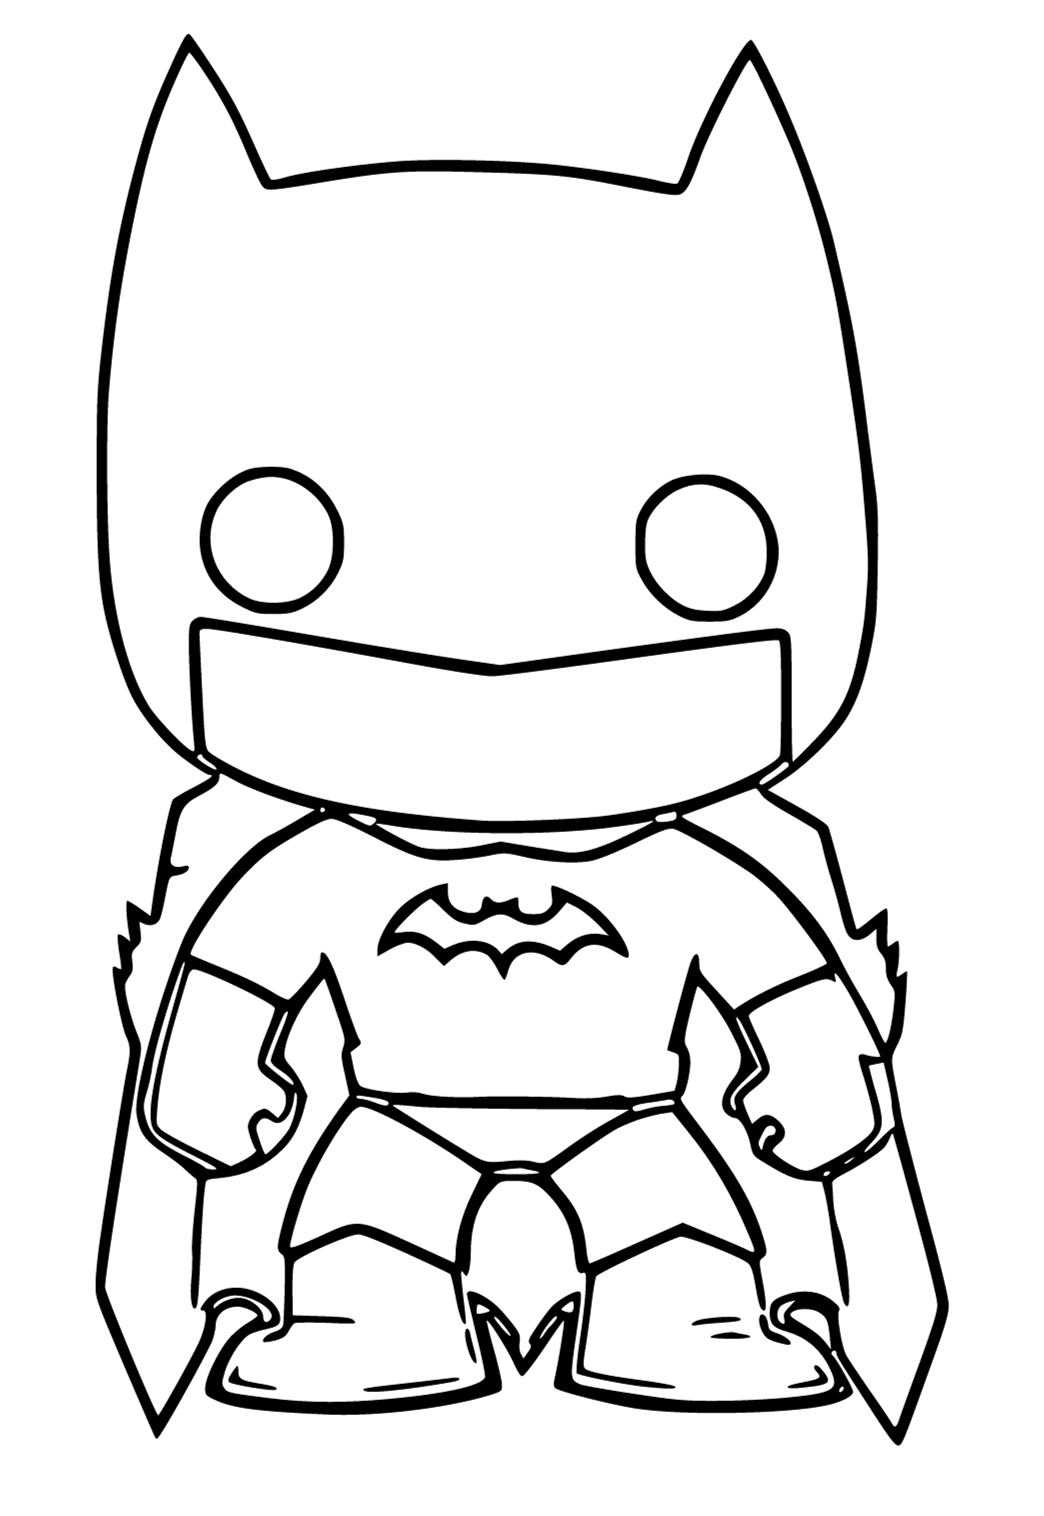 Free printable funko pop batman coloring page for adults and kids